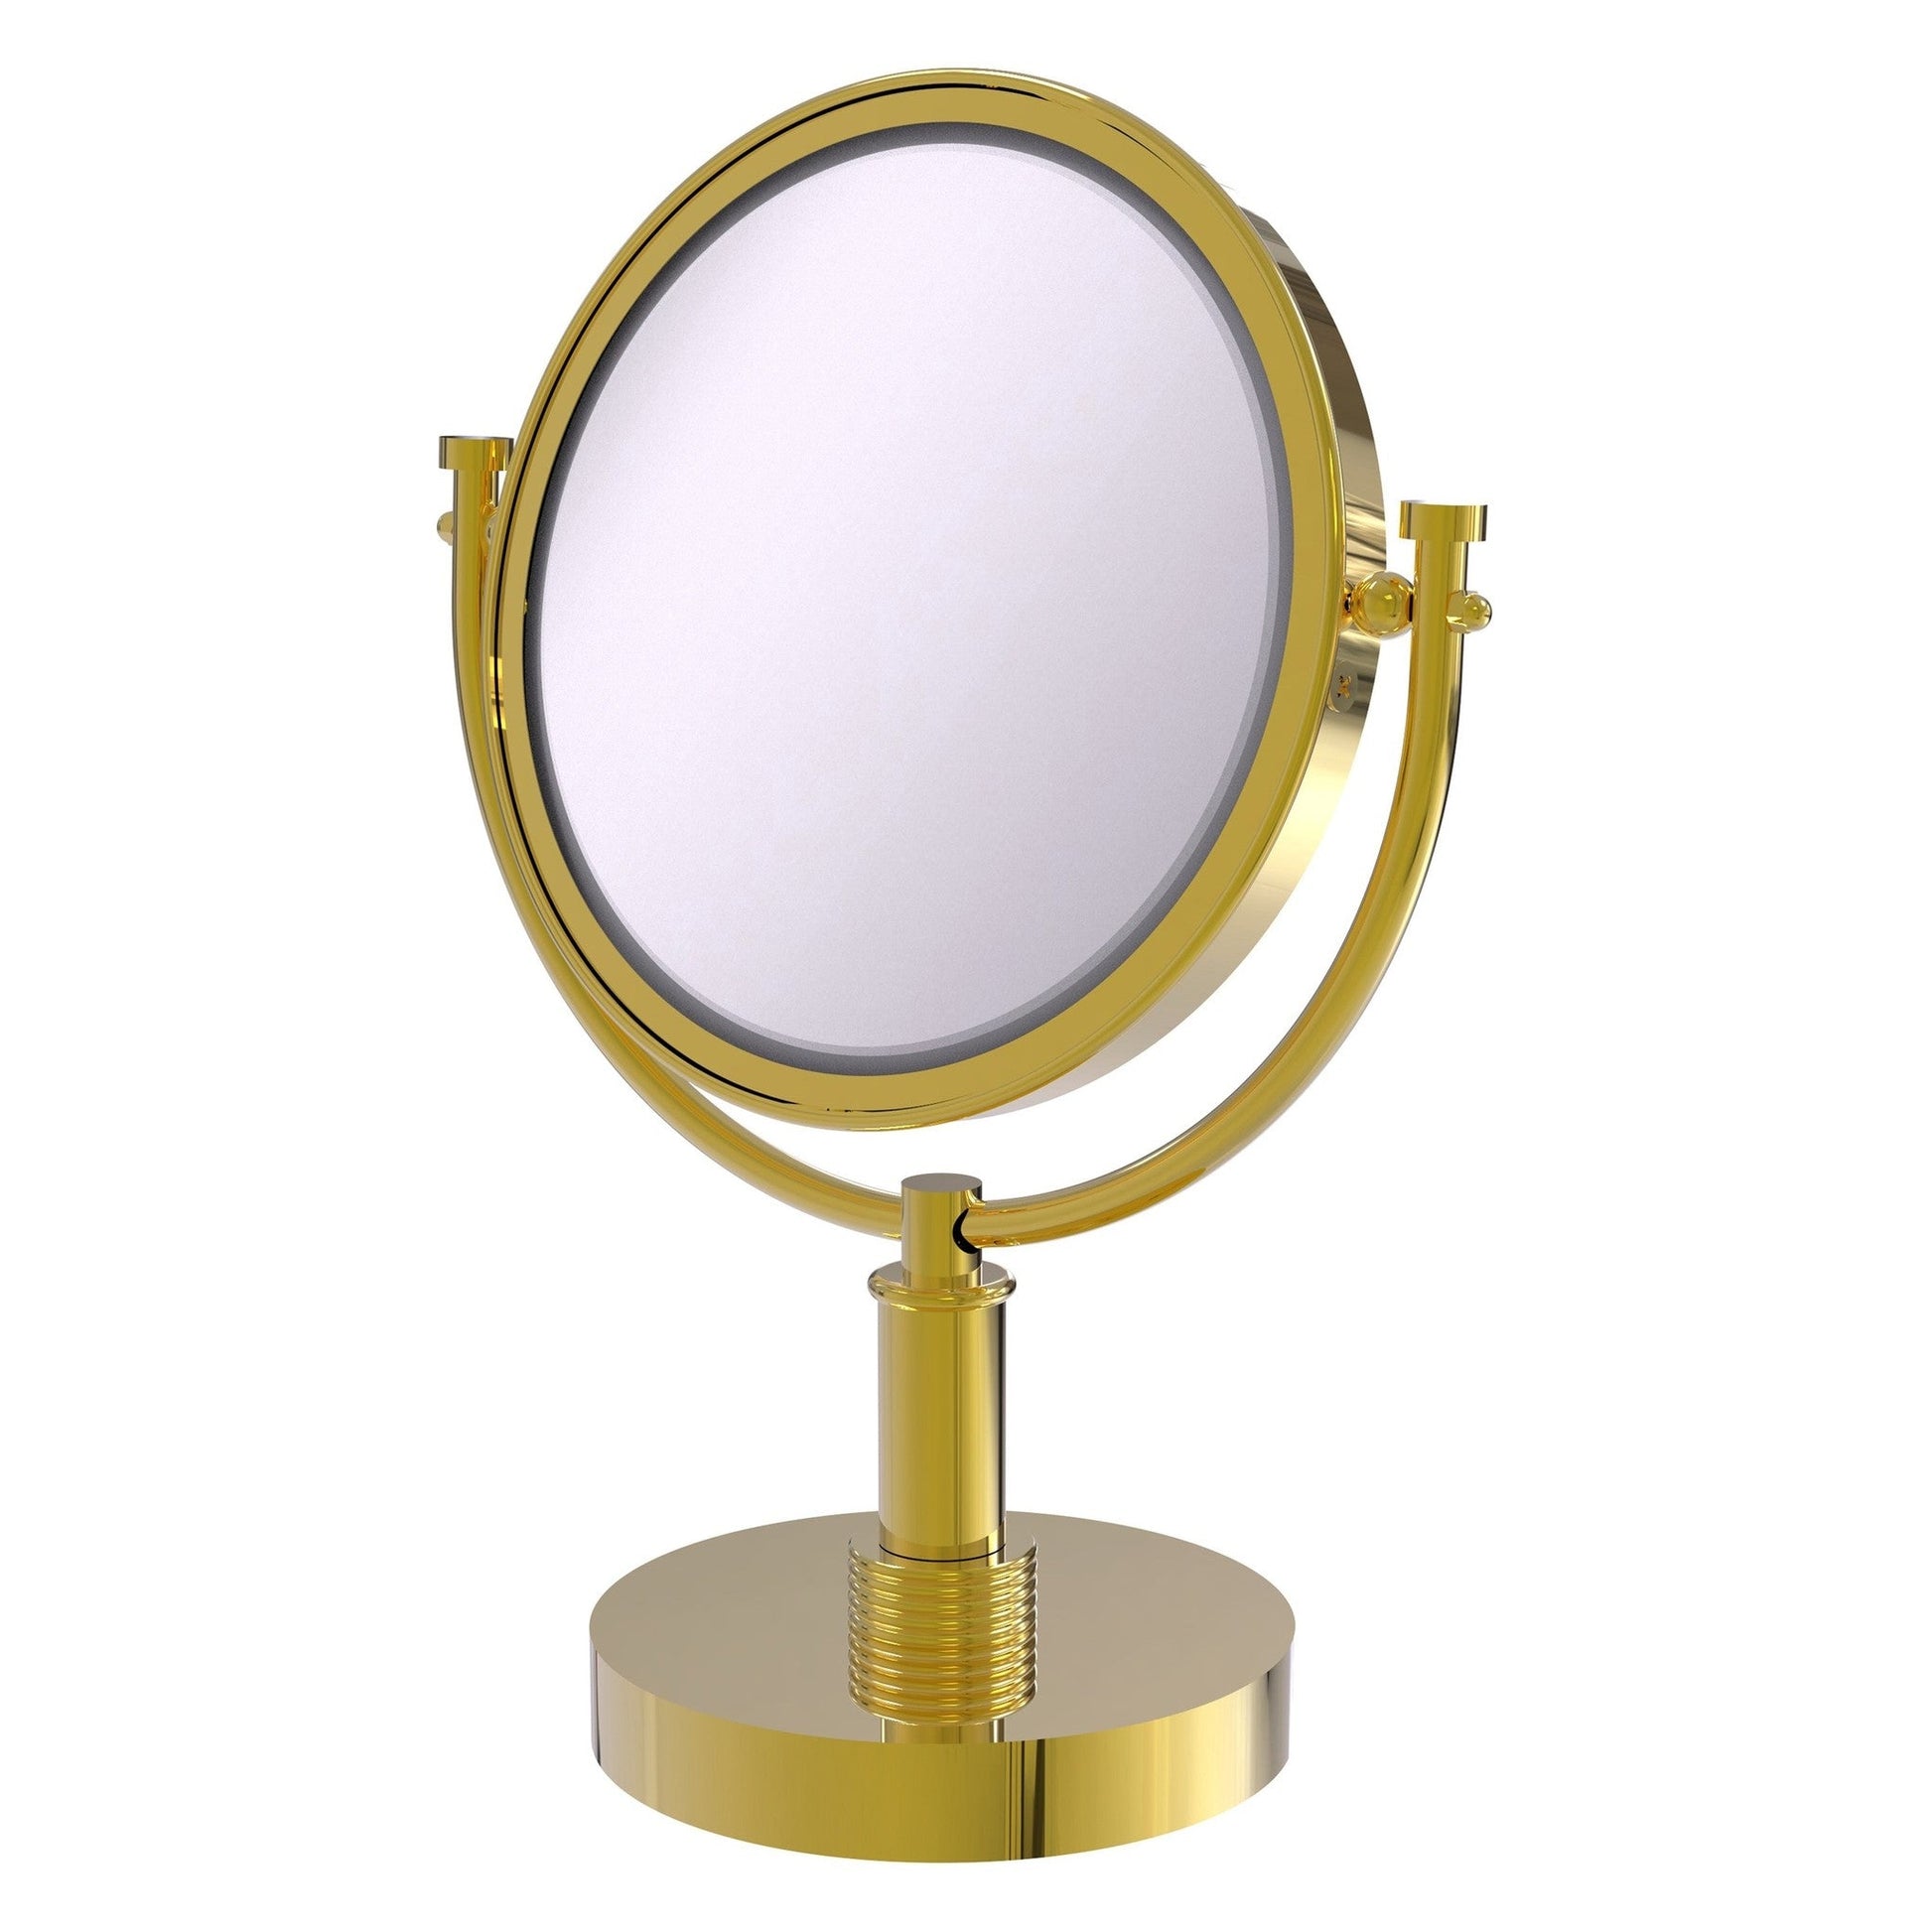 Allied Brass DM-4G/5X 8" x 8" Polished Brass Solid Brass Vanity Top Make-Up Mirror 5X Magnification